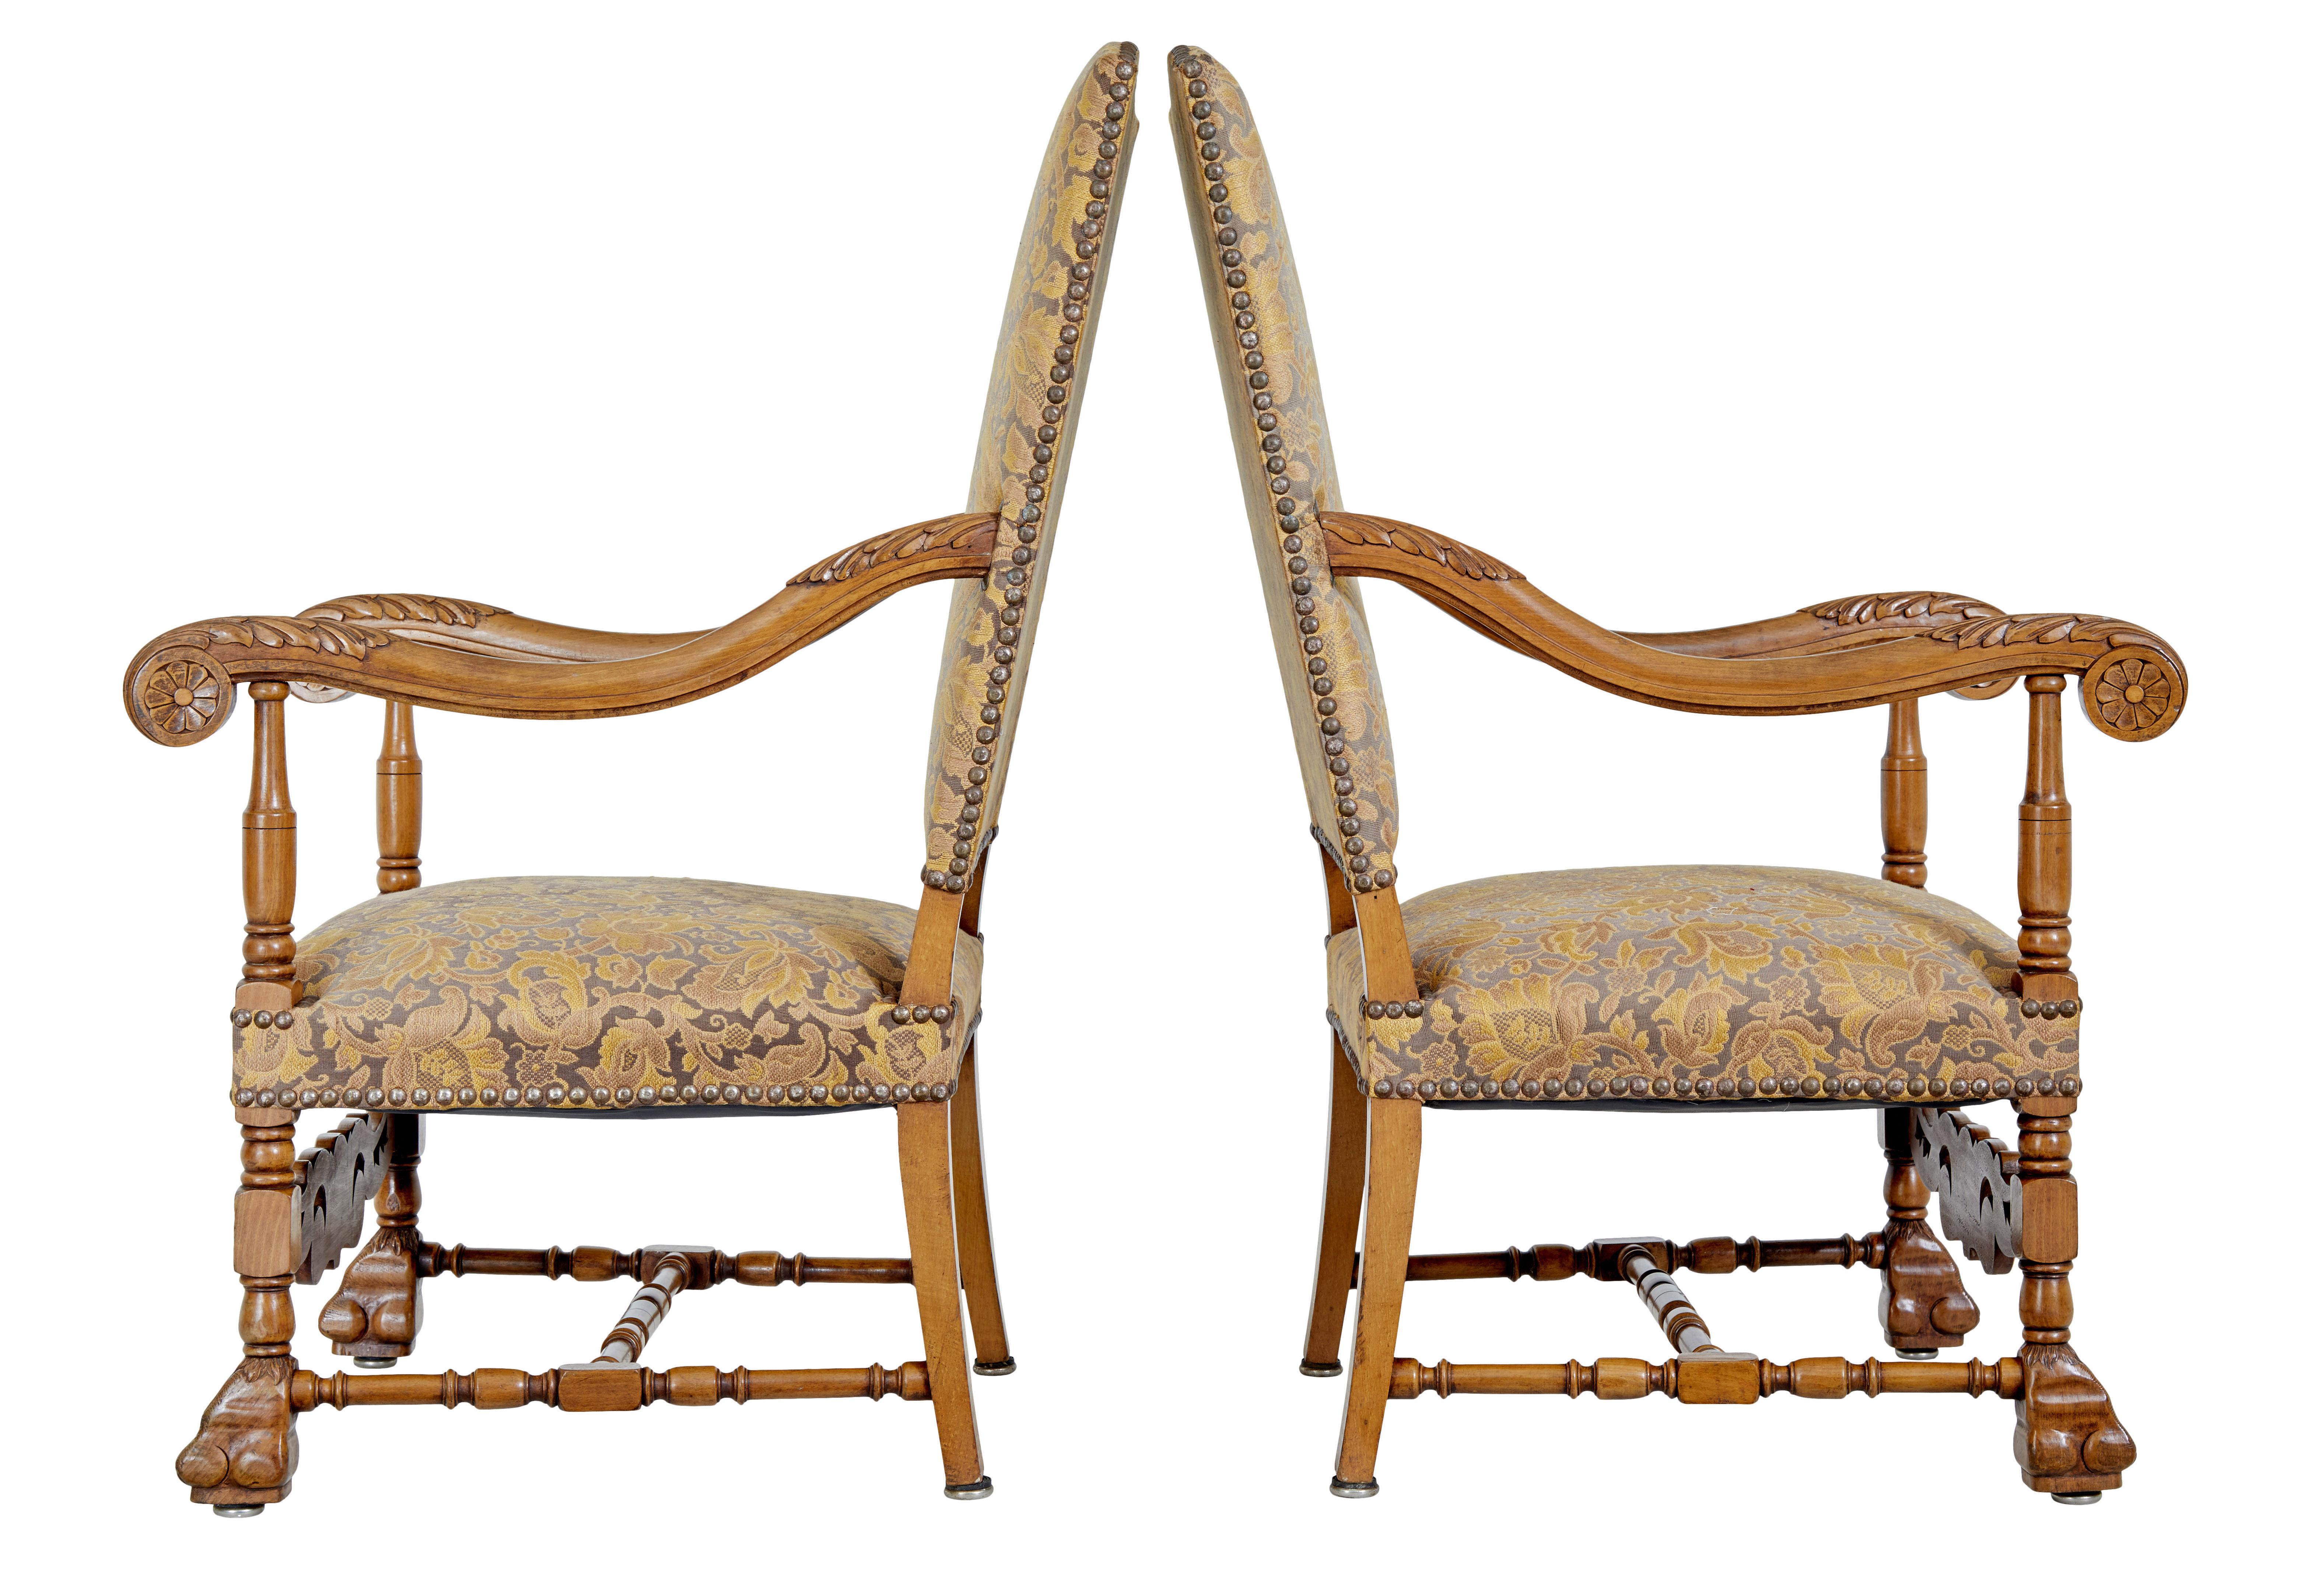 Pair of 19th century carved French baroque throne armchairs, circa 1890.

Good quality pair of armchairs of large proportions. Shield shaped backs, heavily carved scrolled arms with turned supports. Standing on turned front legs with paw feet,